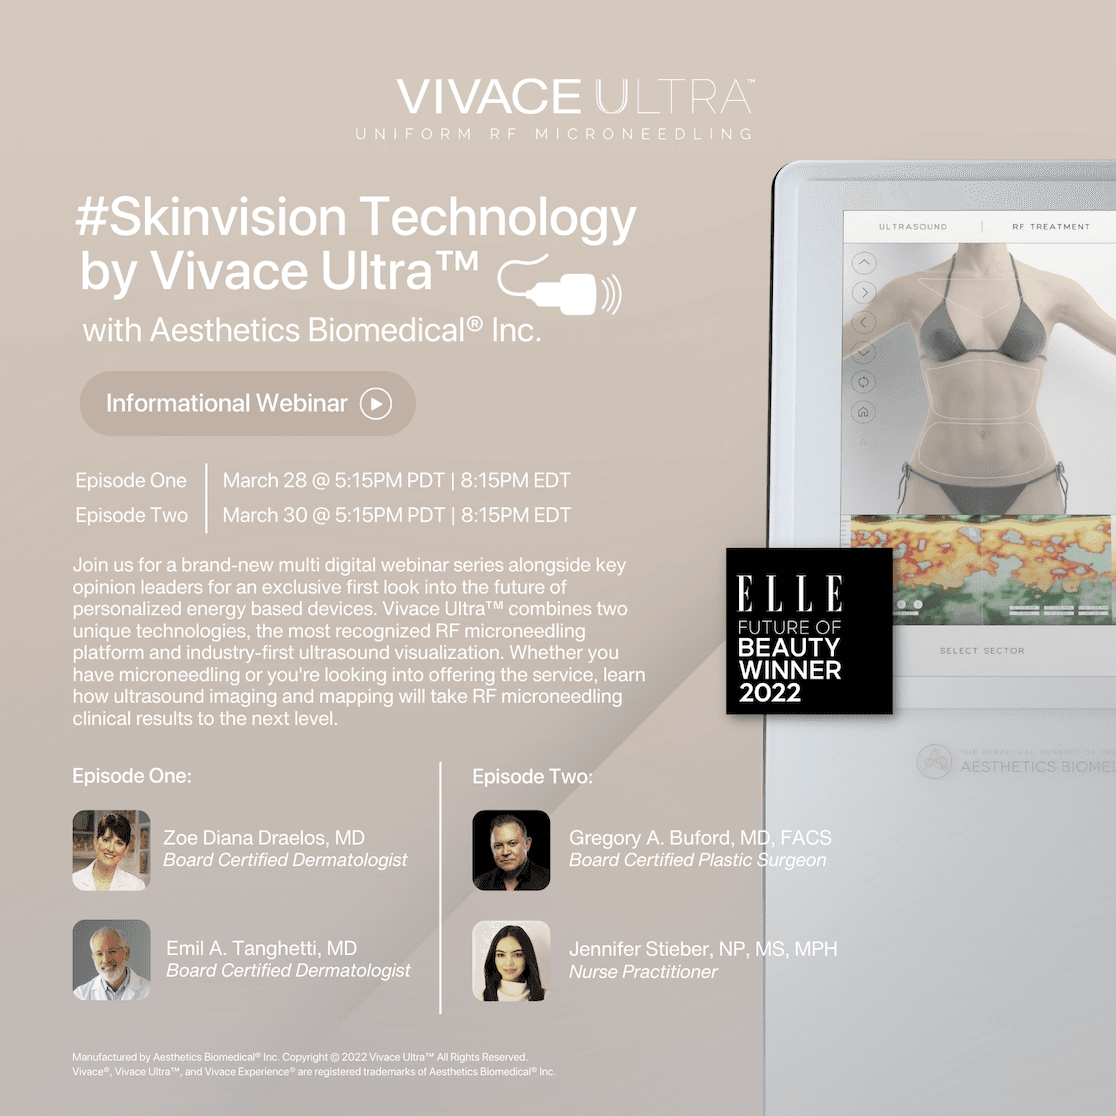 Product Aesthetics Biomedical® presents #Skinvision Technology by Vivace Ultra™ - Ep #2 featuring Dr. Buford & Jennifer Stieber, NP - Aesthetics Biomedical image